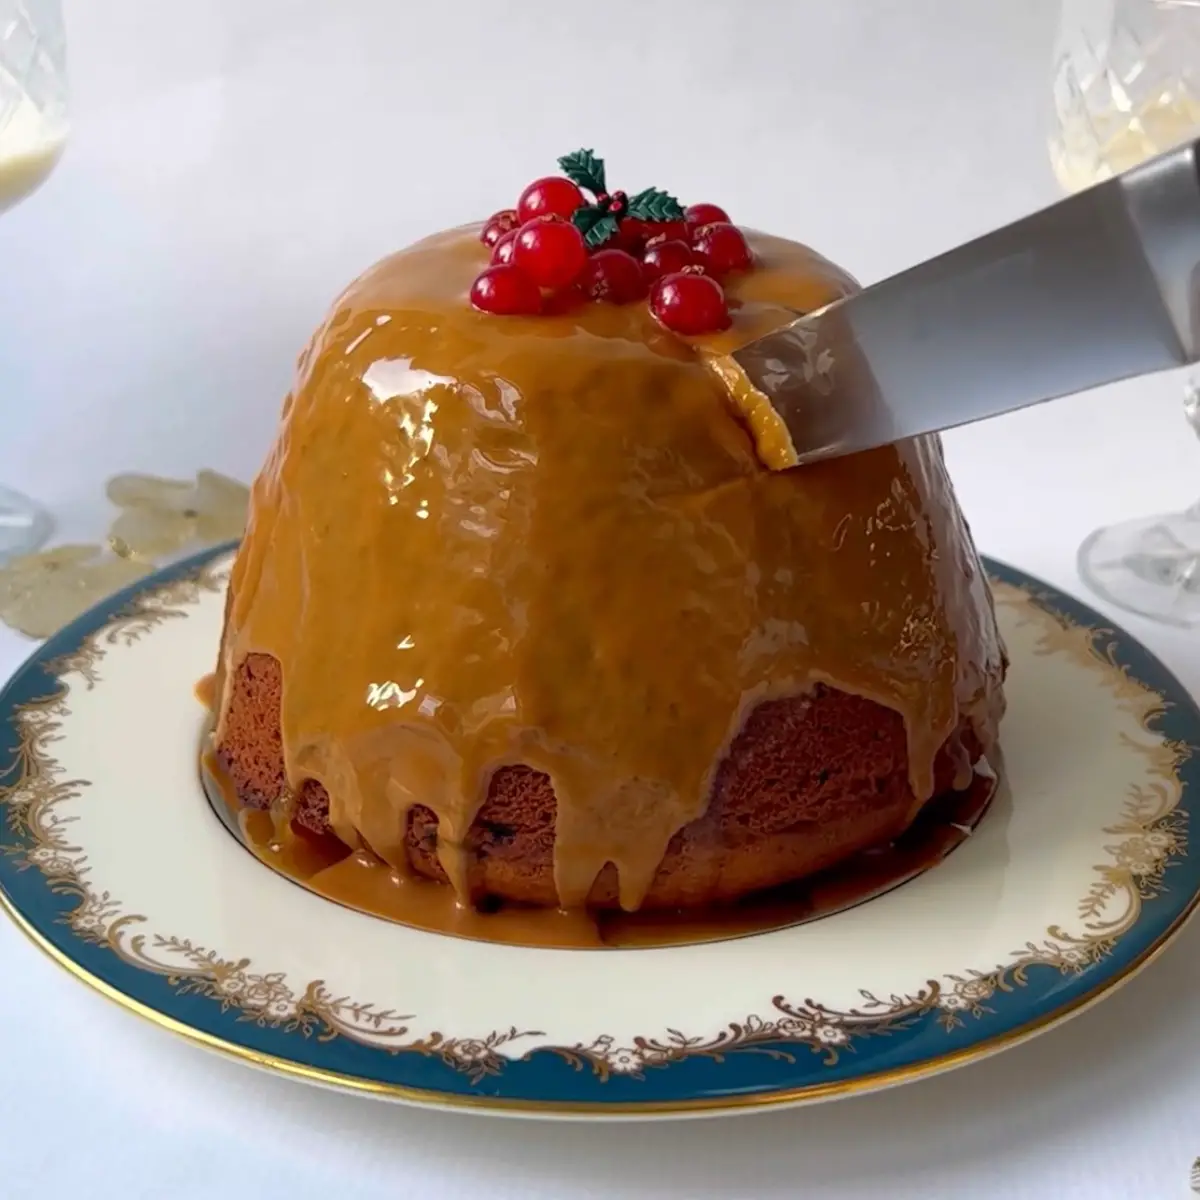 work with me on sticky toffee pudding